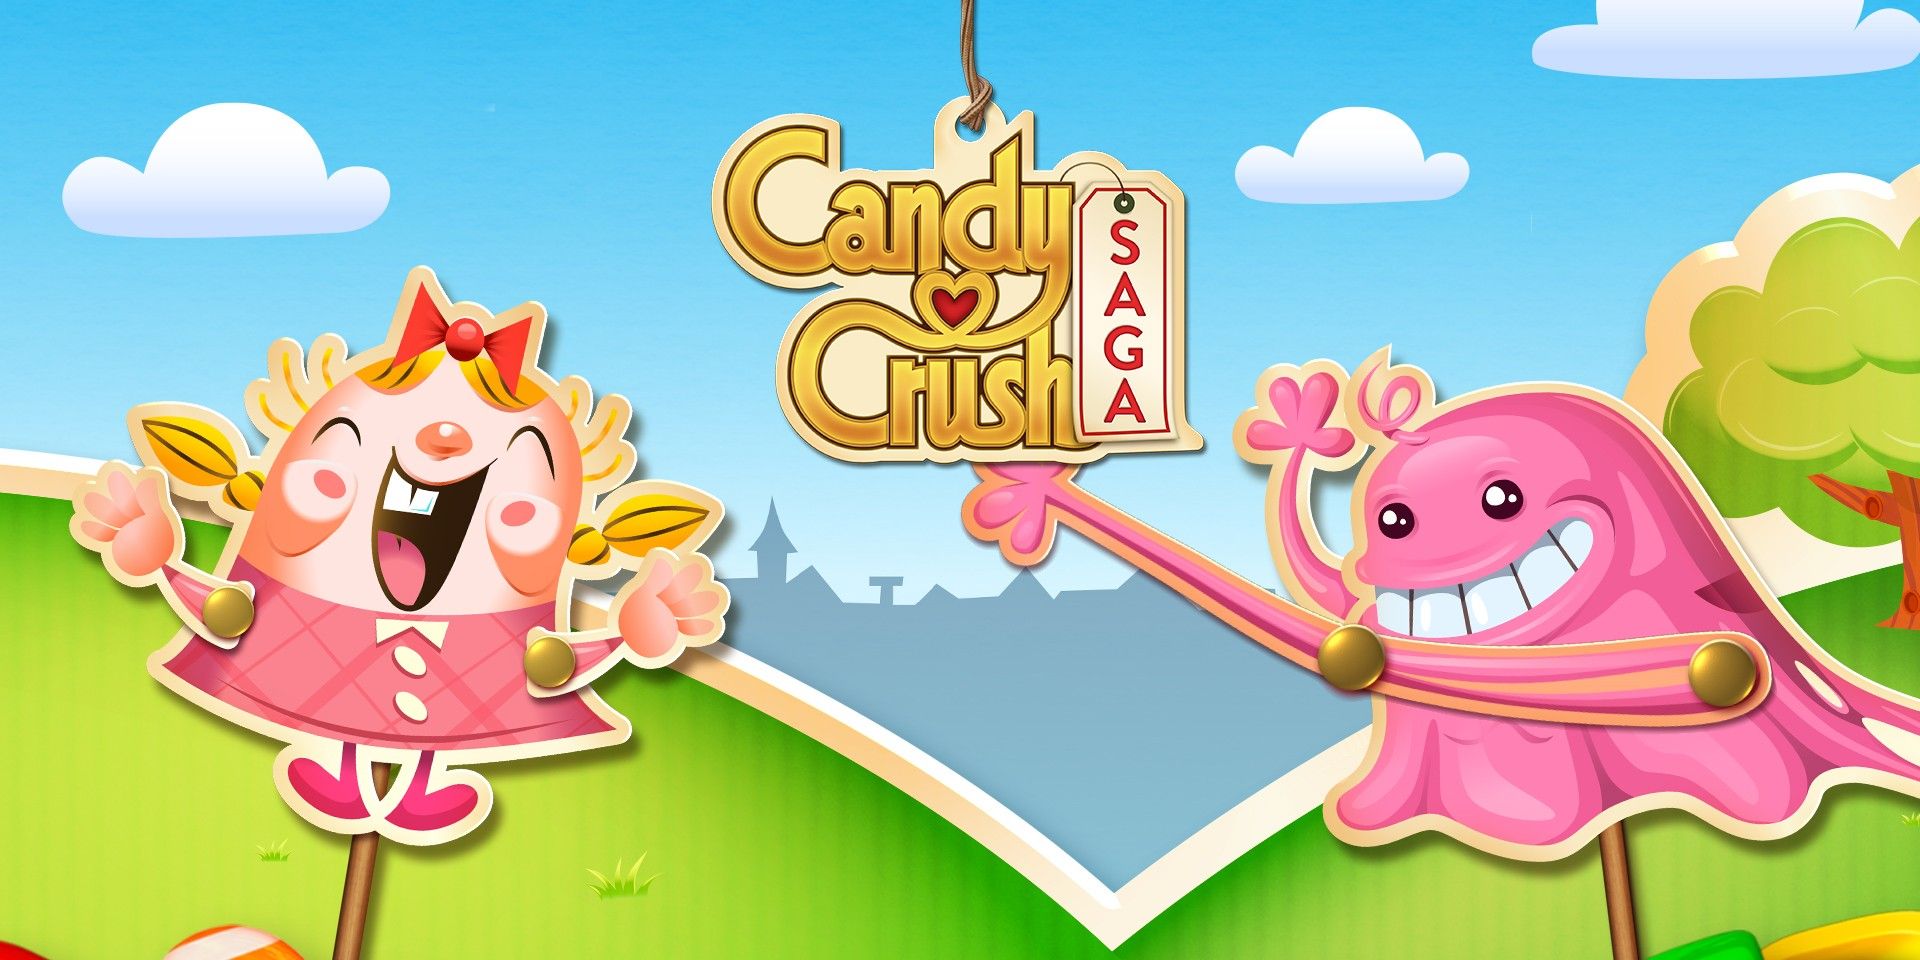 Windows 10 Will Come With Candy Crush Saga Pre-Installed